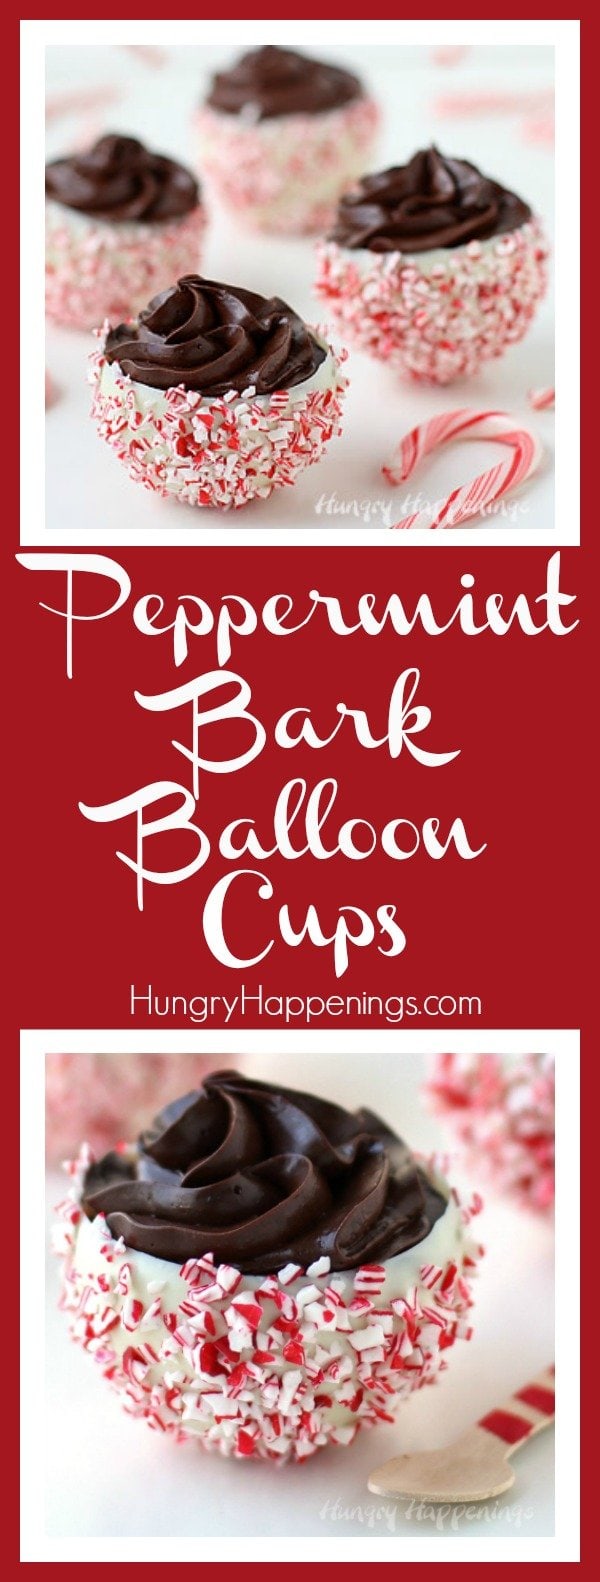 It's fun and easy to create these festive Peppermint Bark Balloon Bowls which can be filled with luscious chocolate mousse or your favorite holiday treat like ice cream or pudding.